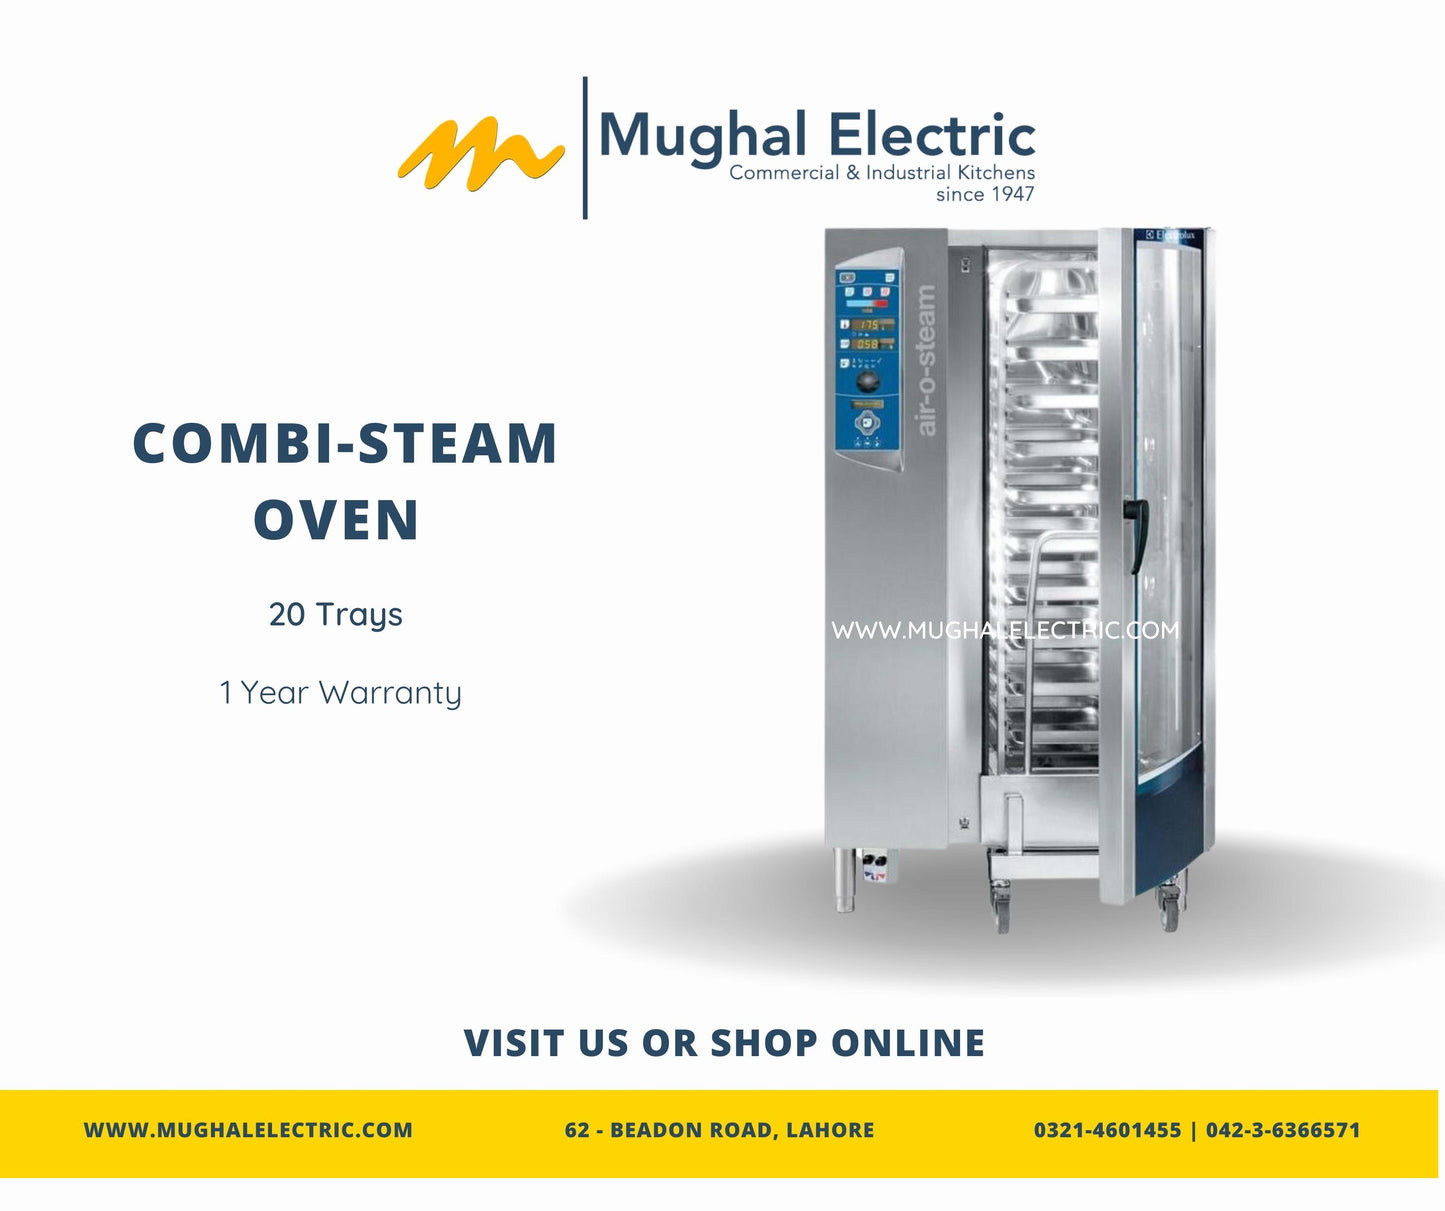 Electrolux Combi-Steam Oven